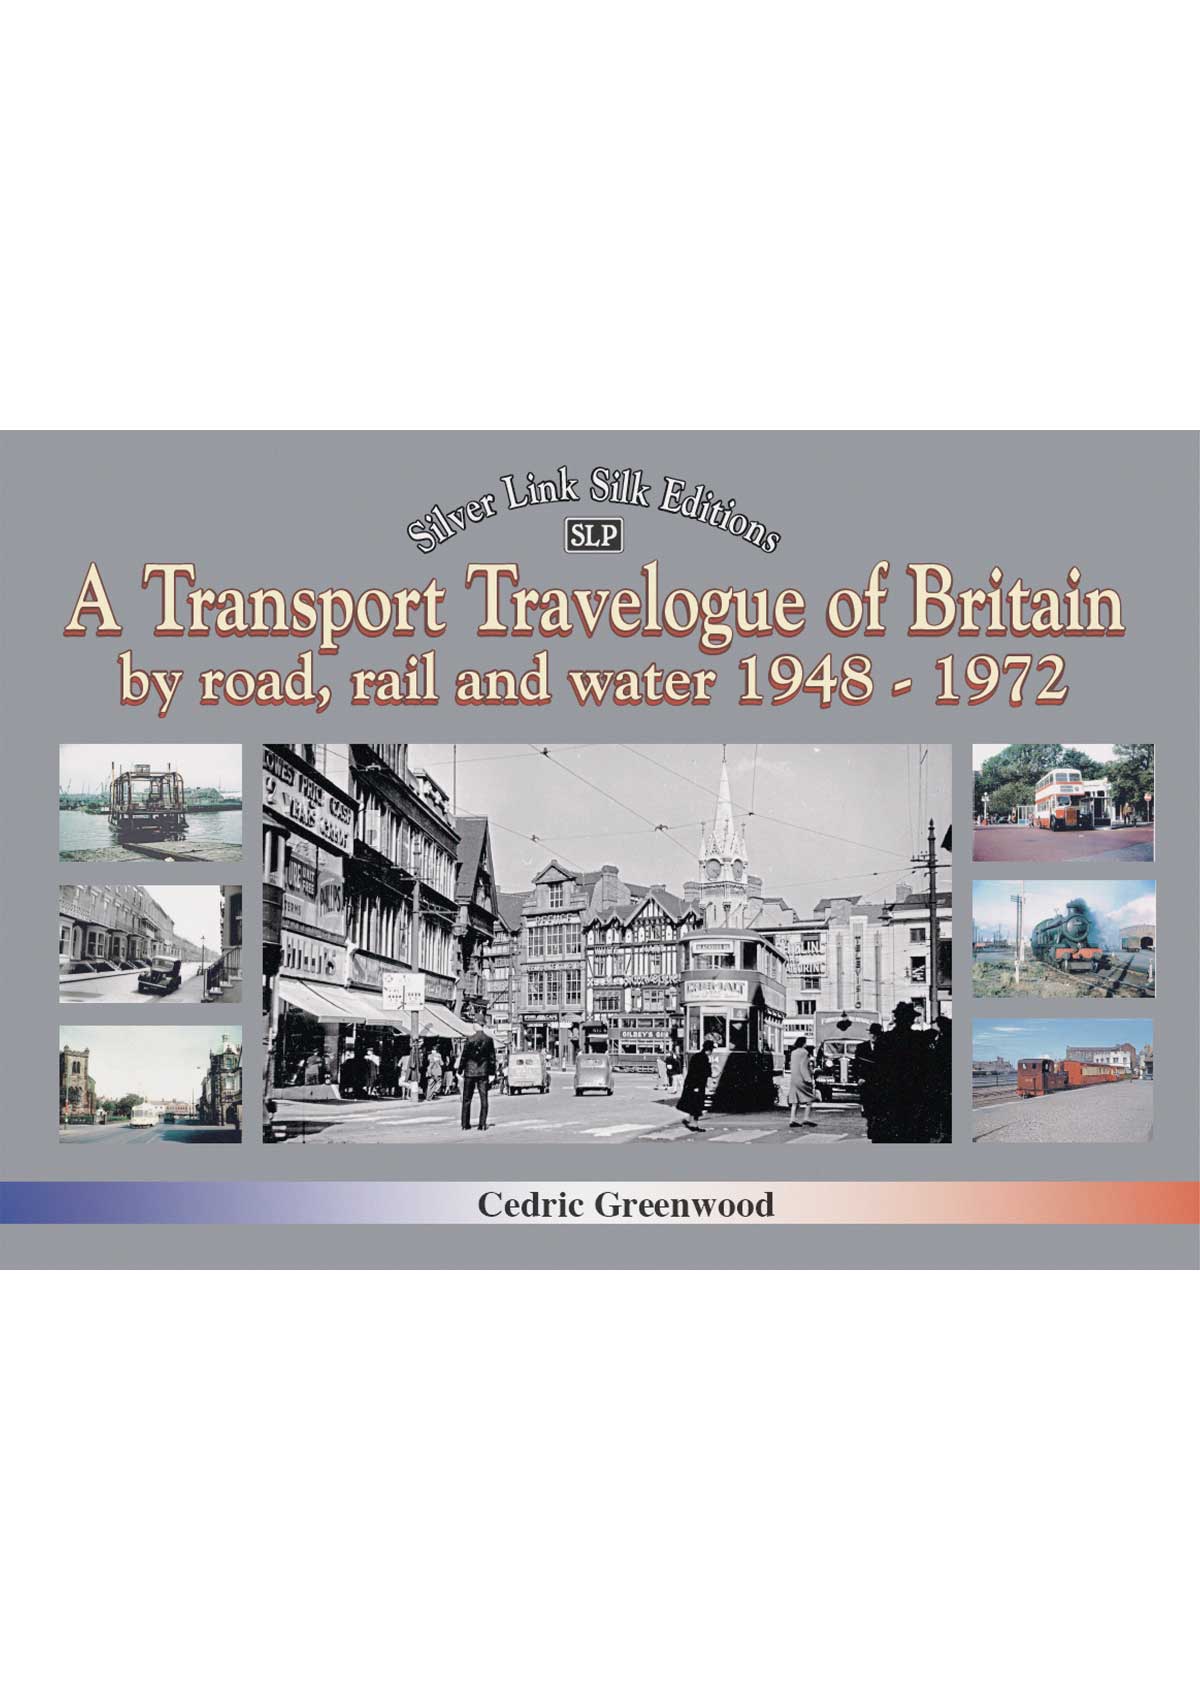 5058 A Transport Travelogue of Britain by Road, Rail and Water 1948-1972